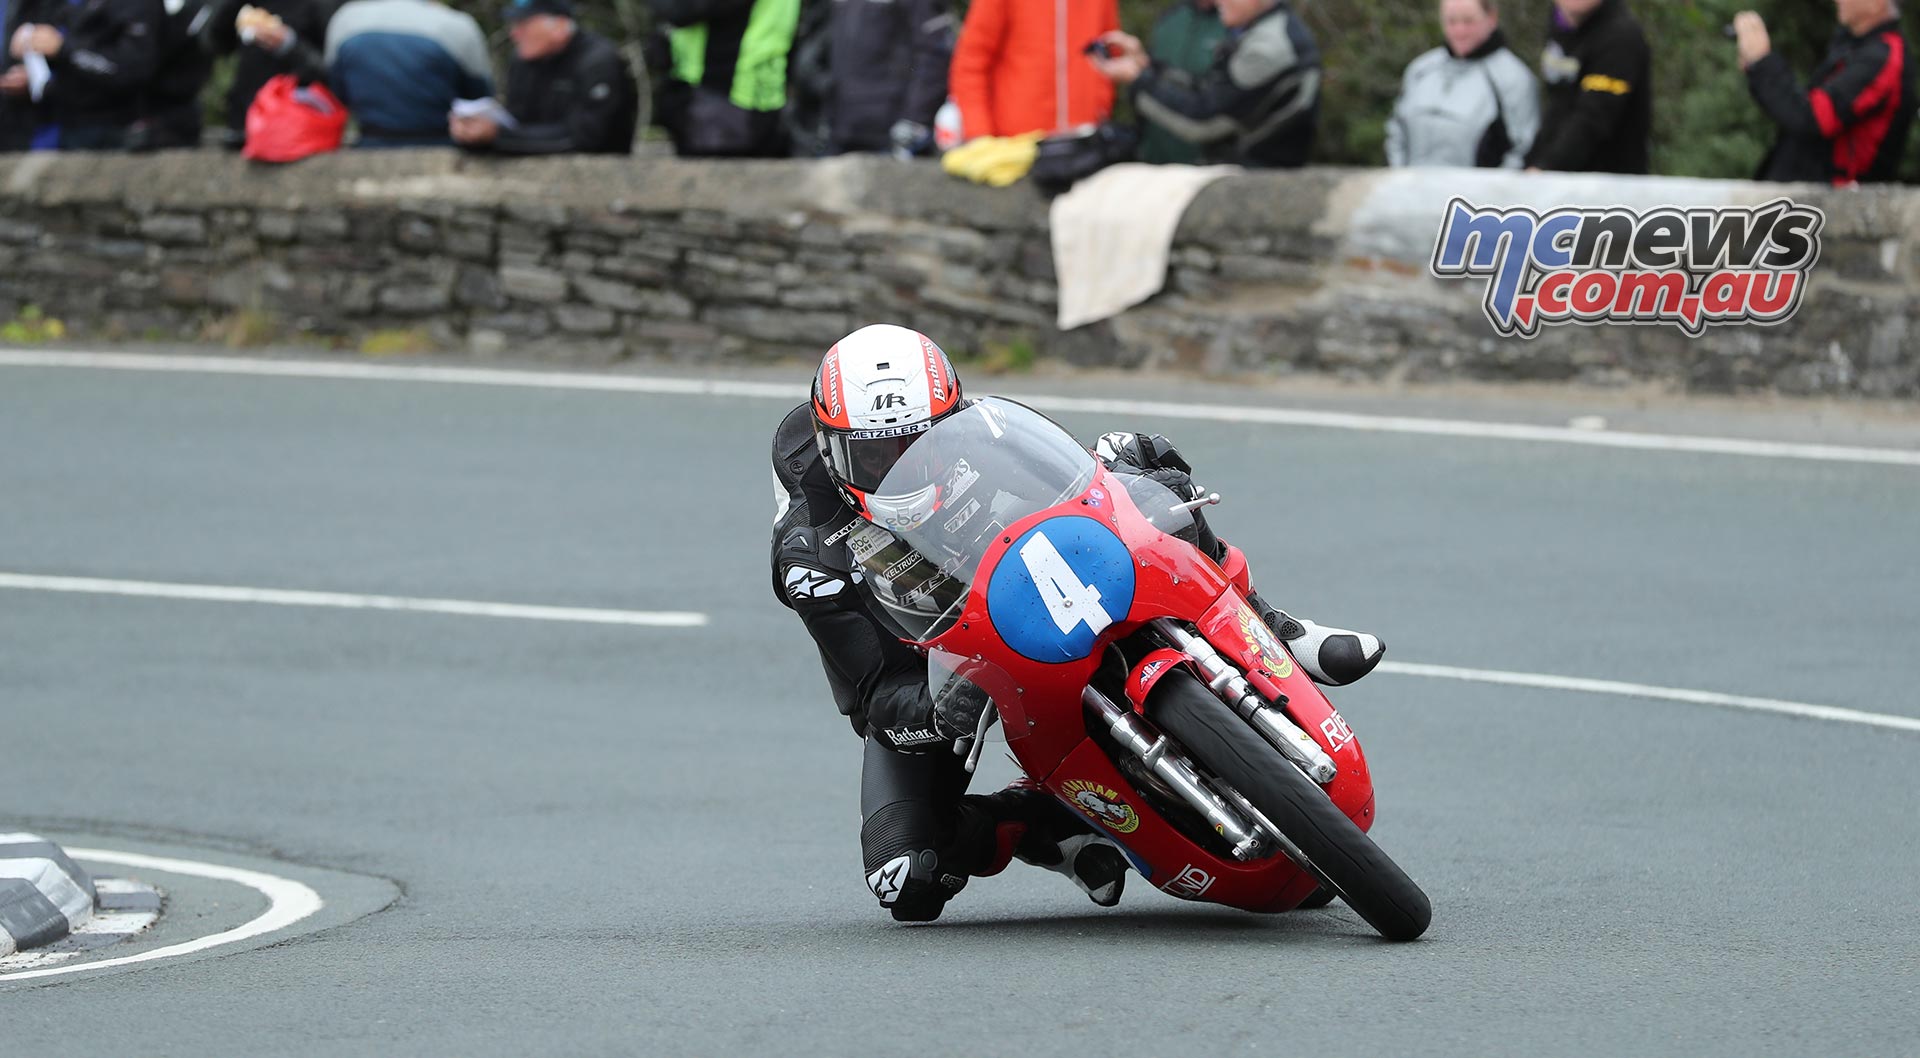 Michael Rutter at the Gooseneck on his way to winning the Sure Junior Classic TT Race. Photo Dave Kneen